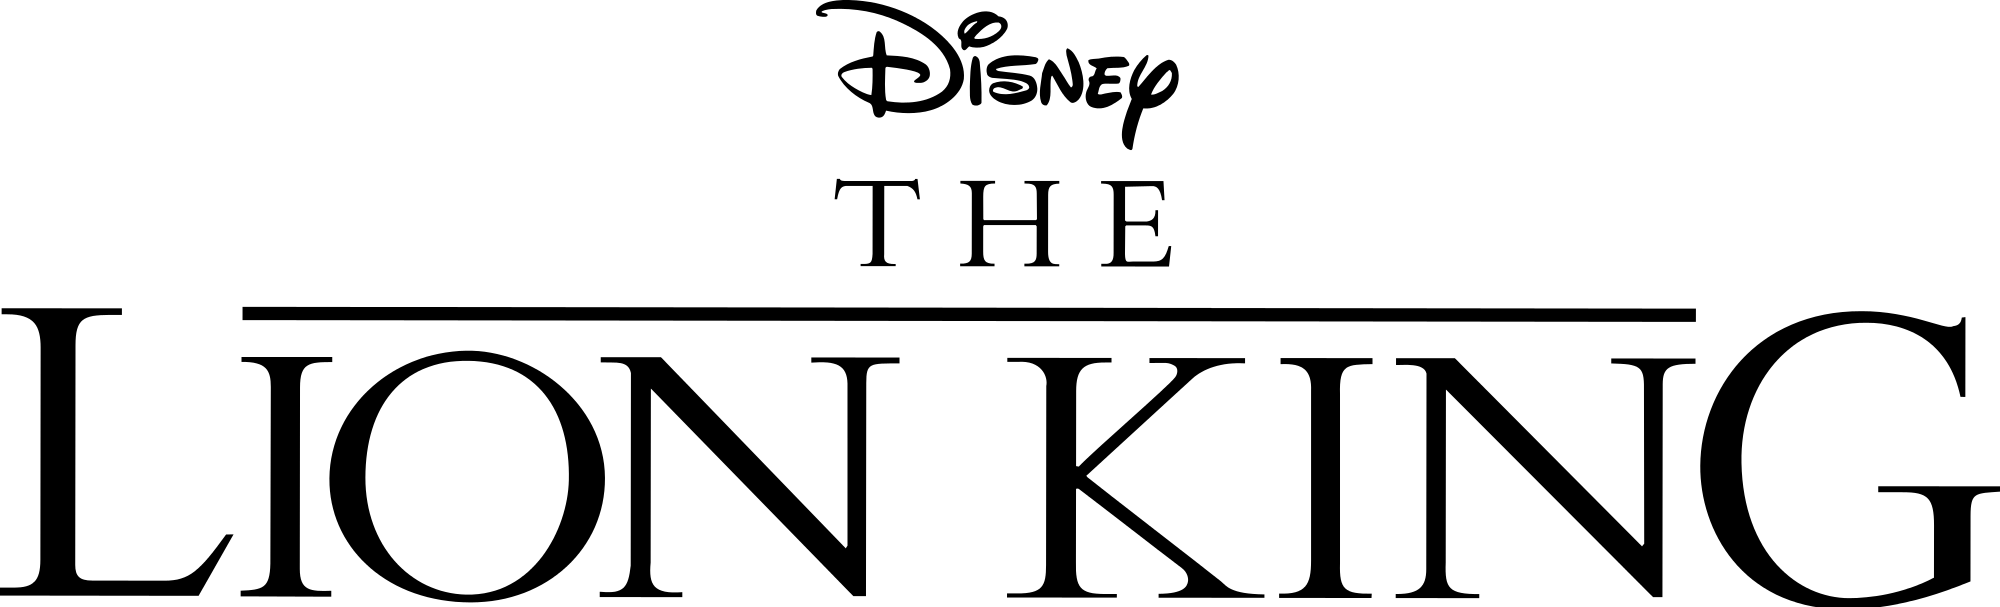 The Lion King Movie Logo - File:The Lion King logo.svg - Wikimedia Commons